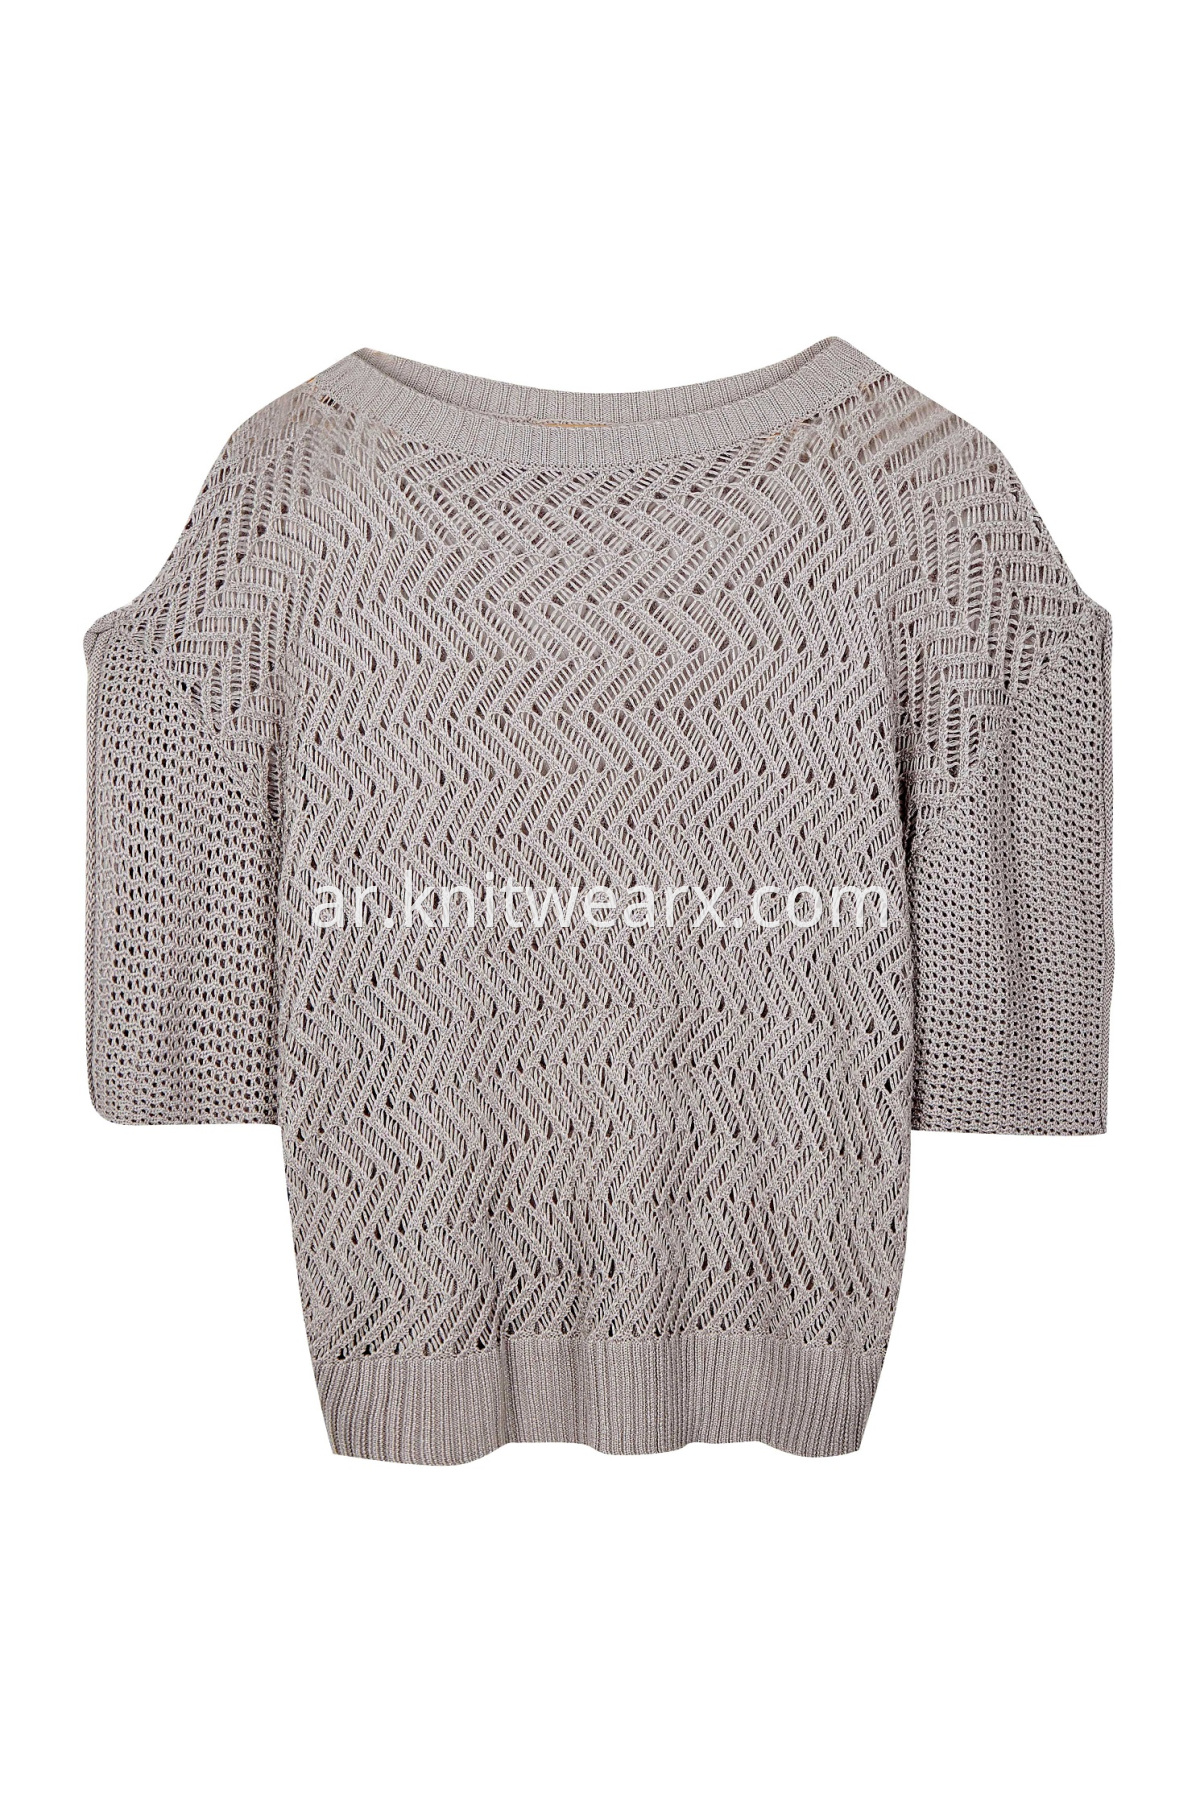 Women's Loose Hollow Out Casual Sweater Tops